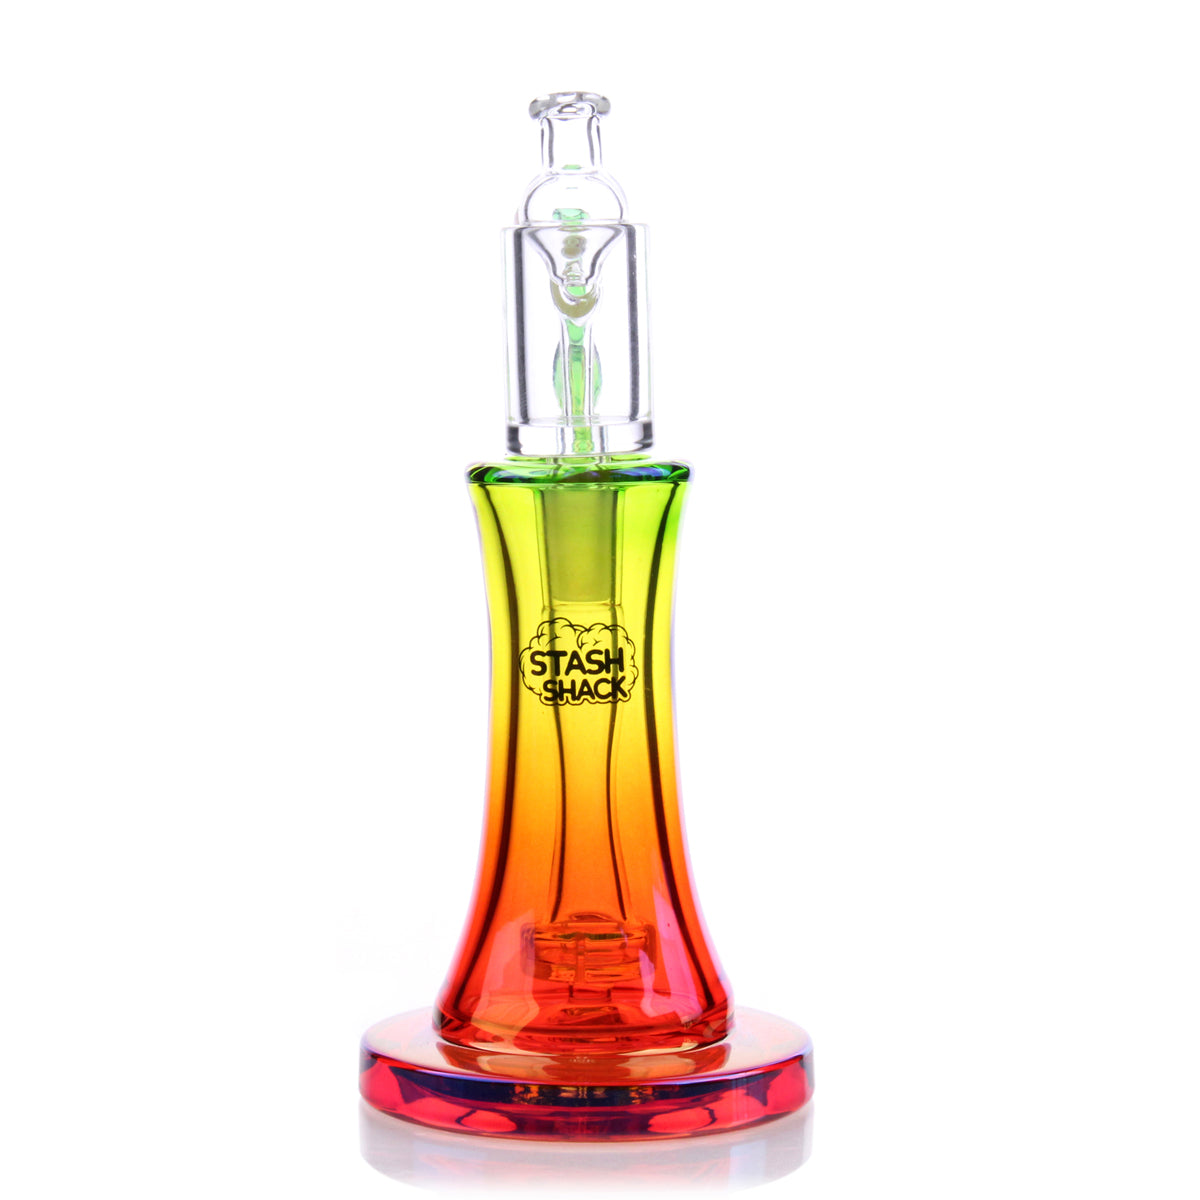 Aurelia Mini Rig by The Stash Shack in Rasta colors, front view, compact 5" borosilicate glass dab rig